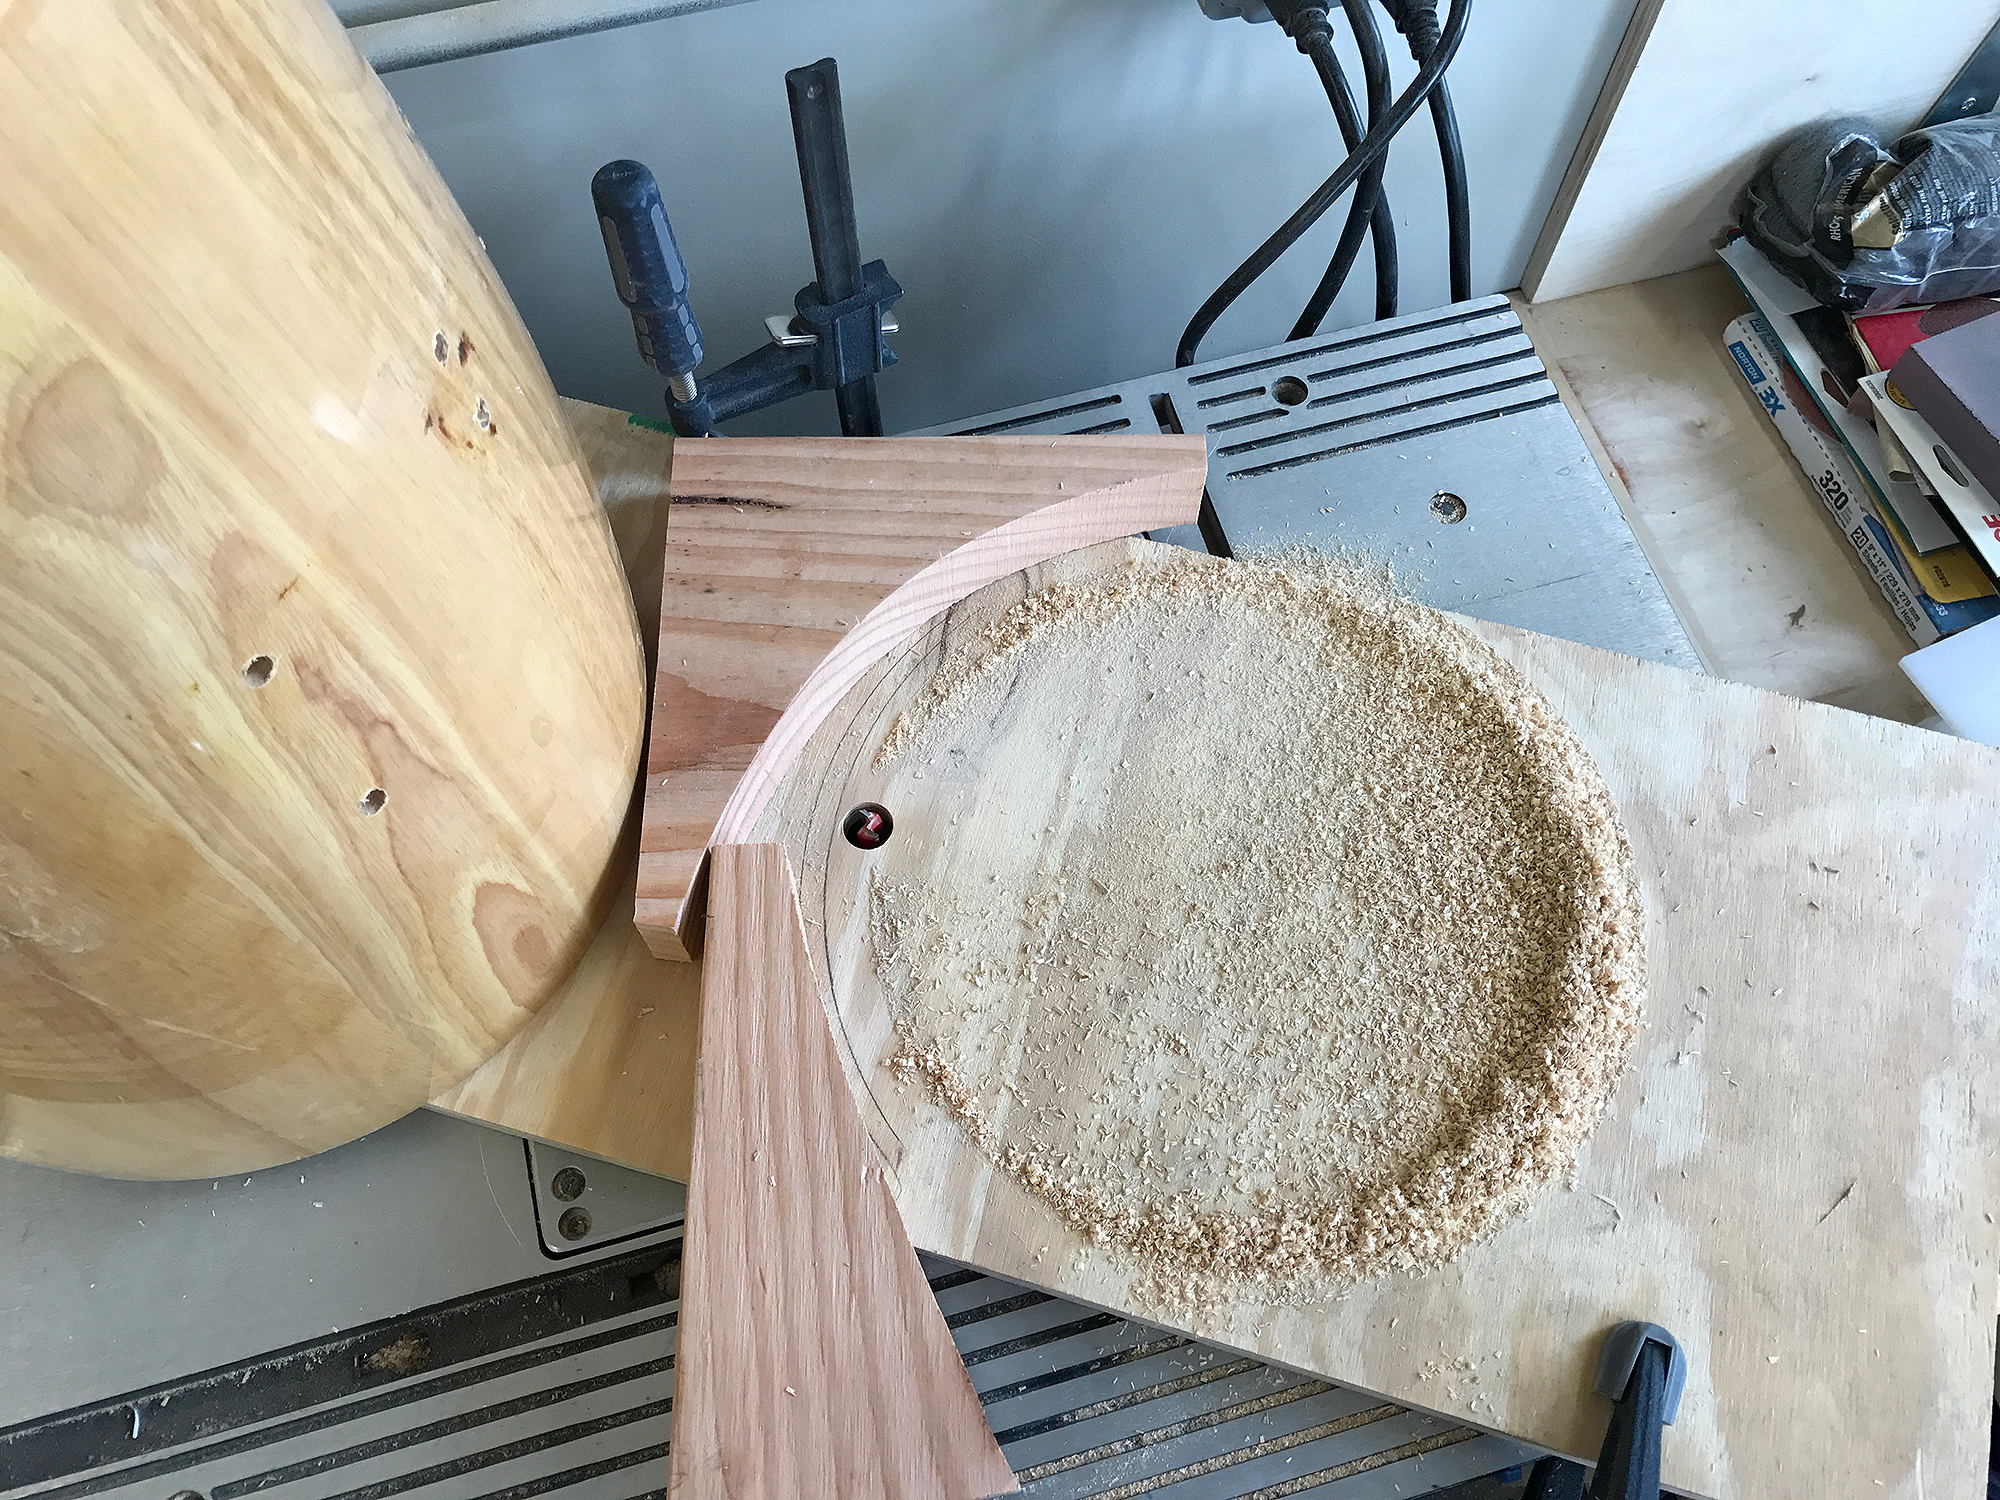 the router set up to create a rabbet for plywood discs